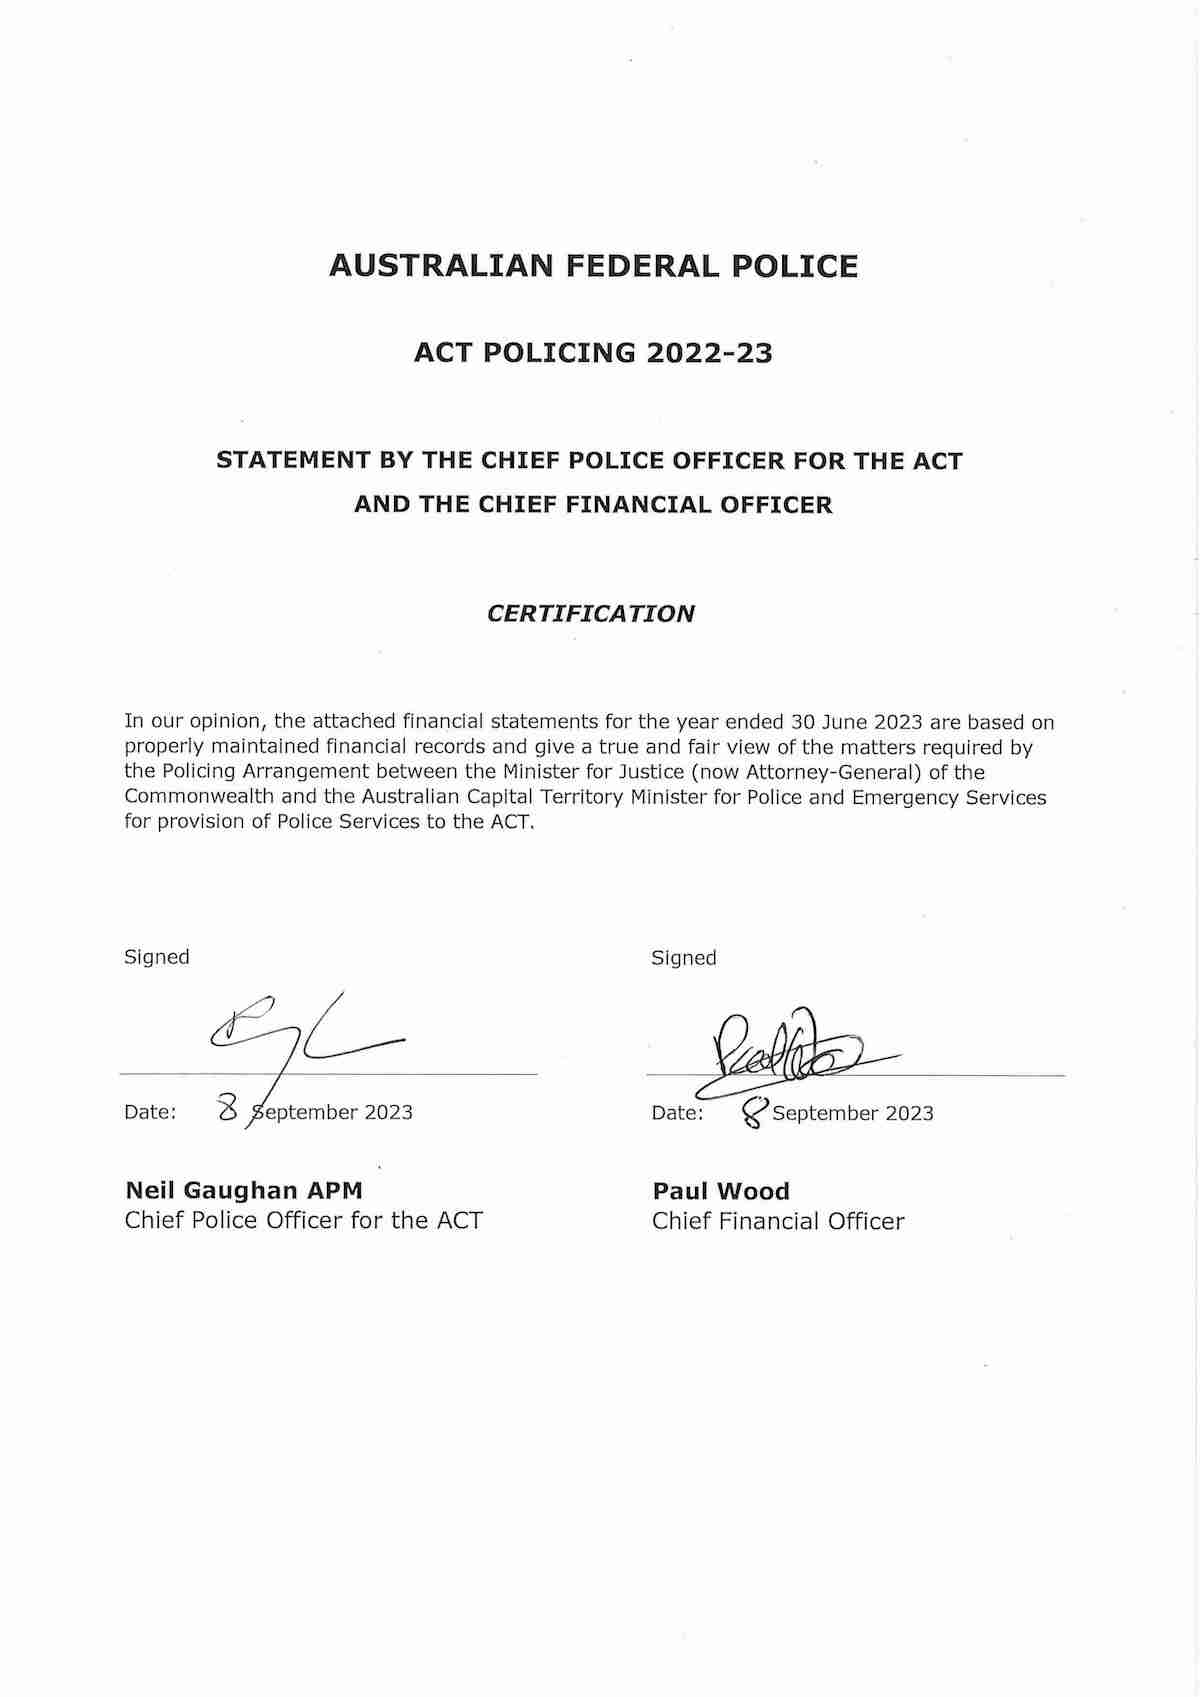 These images are ACT Policing’s Financial Statements.